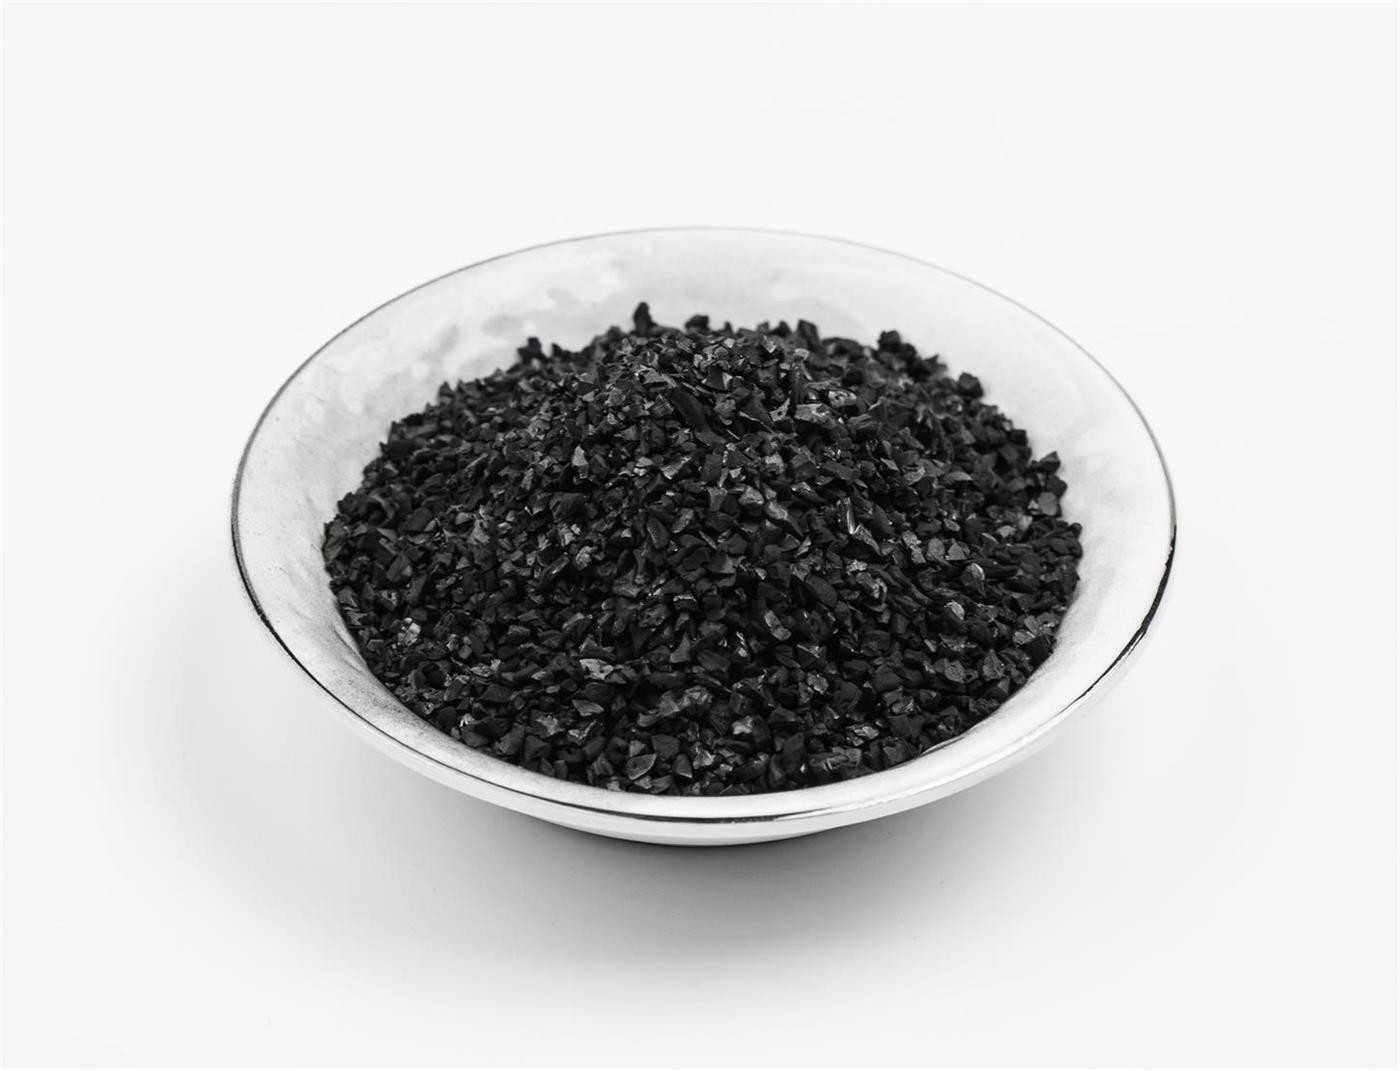  Gold Recovery Coconut Based Activated Carbon , Extraction Coal Coconut Activated Charcoal Manufactures